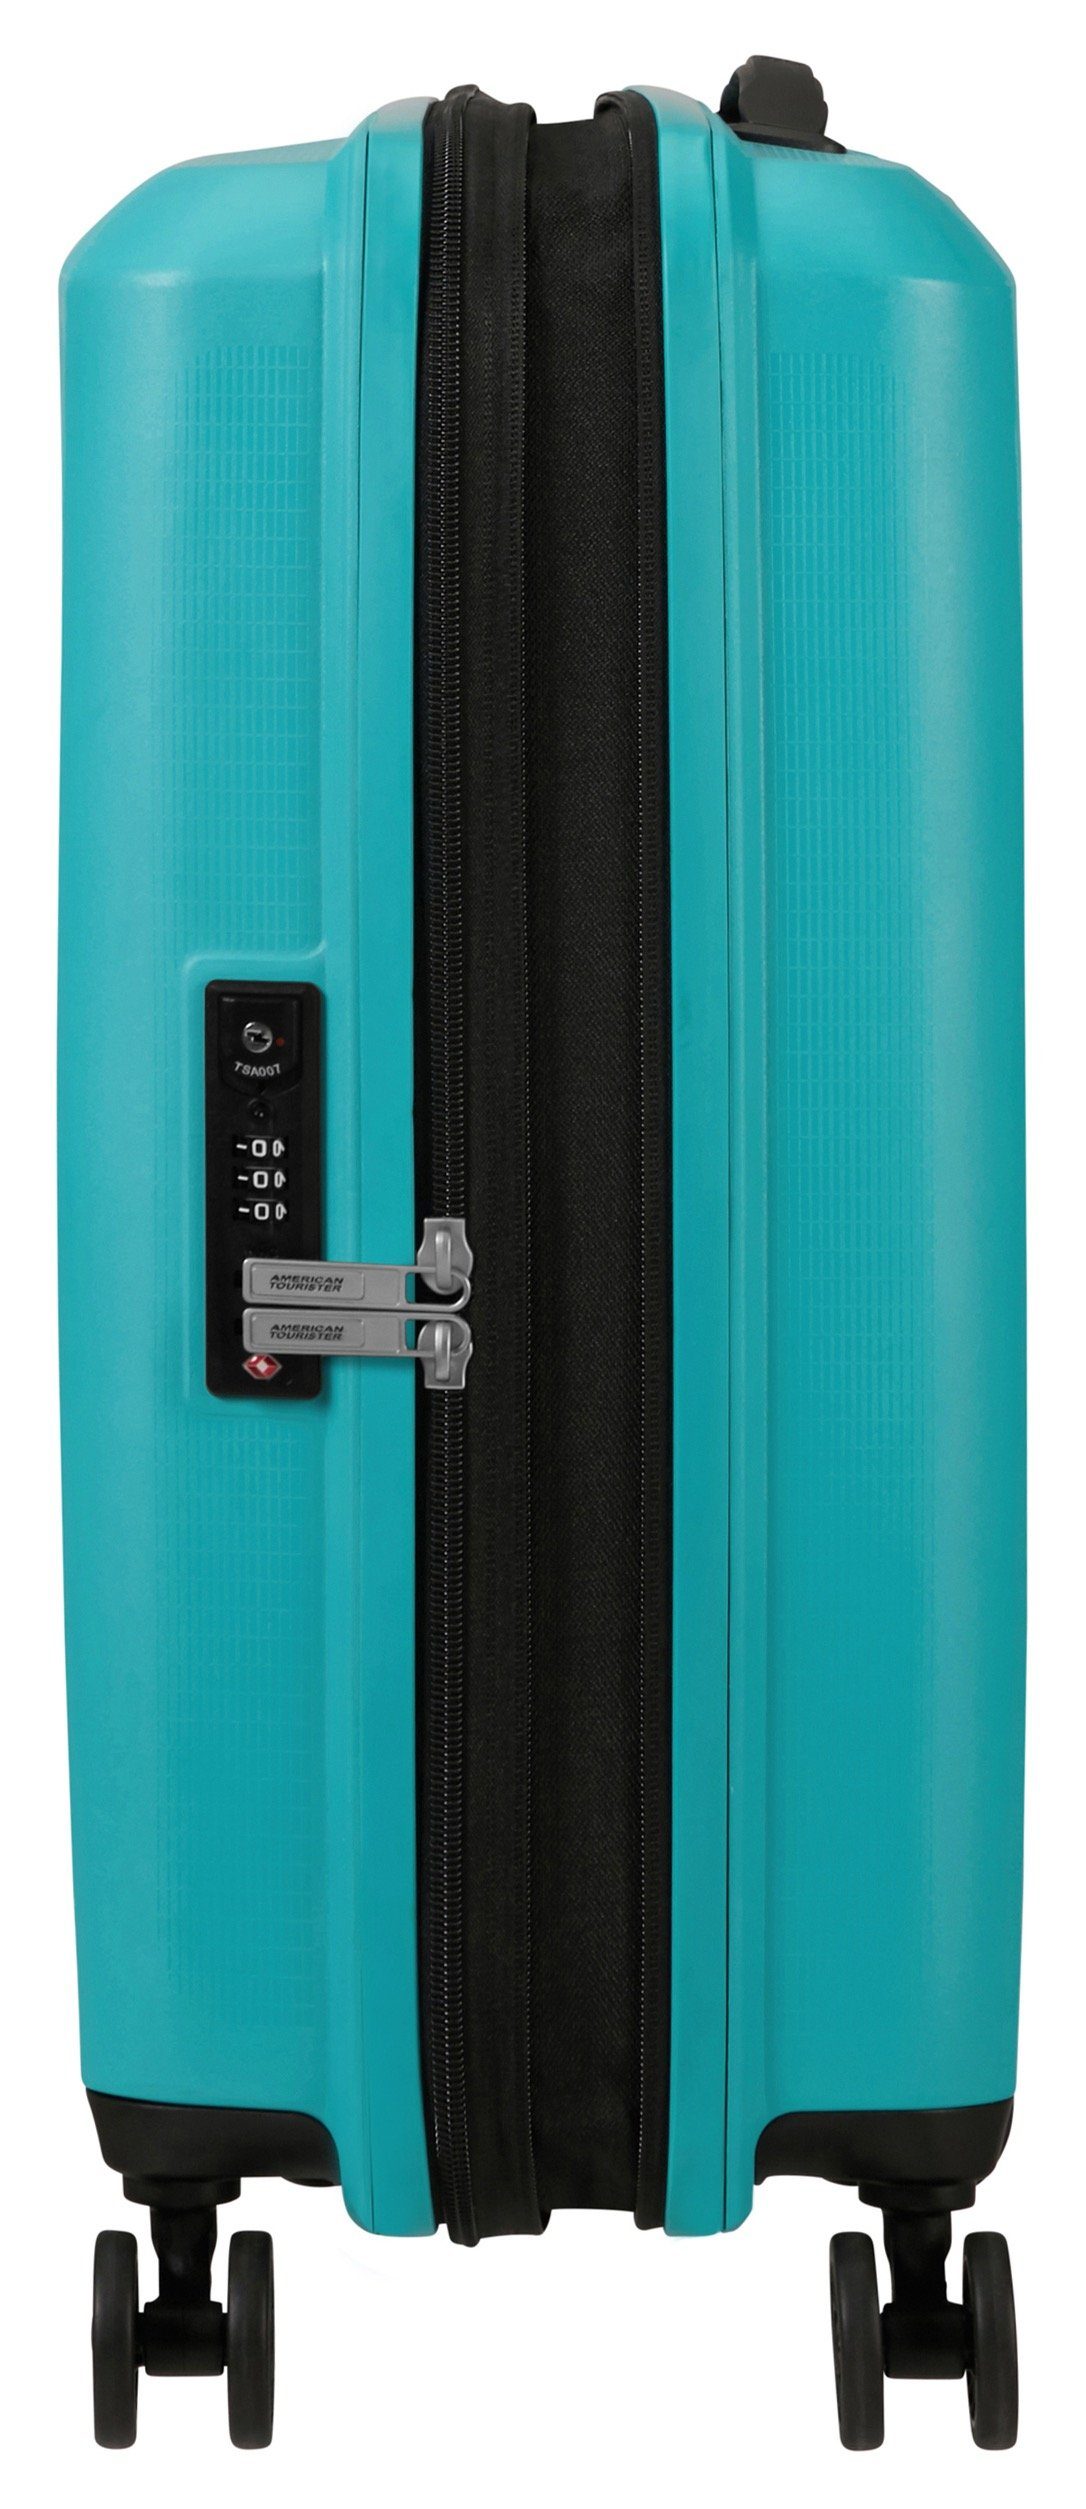 turquoise exp, 4 Tourister® American Rollen tonic AEROSTEP Spinner 55 Koffer